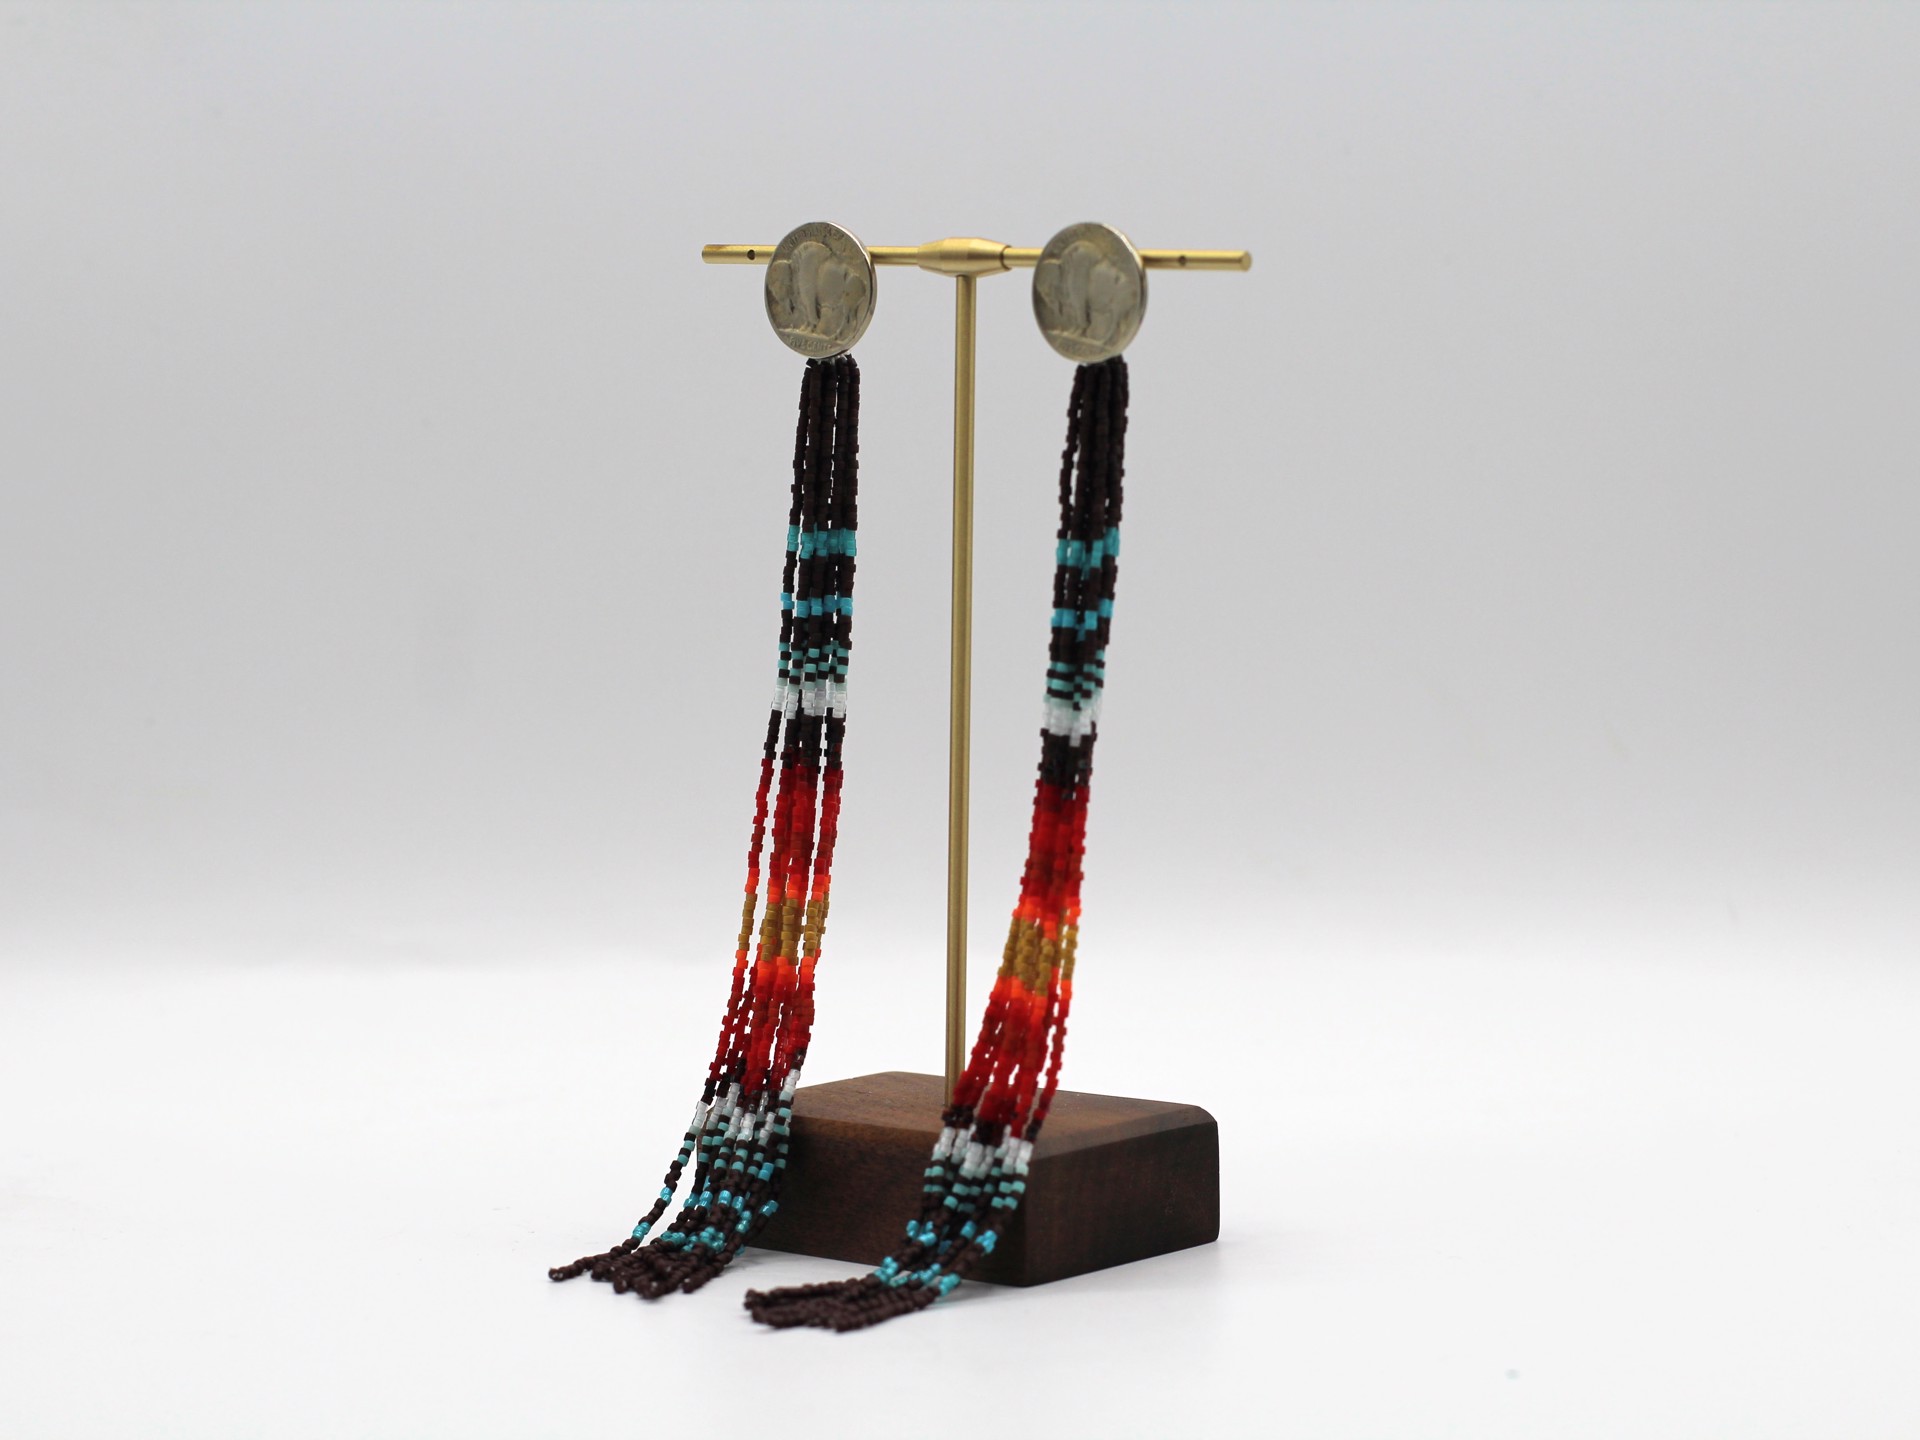 Saddle Blanket Earrings by Jessica Brewer